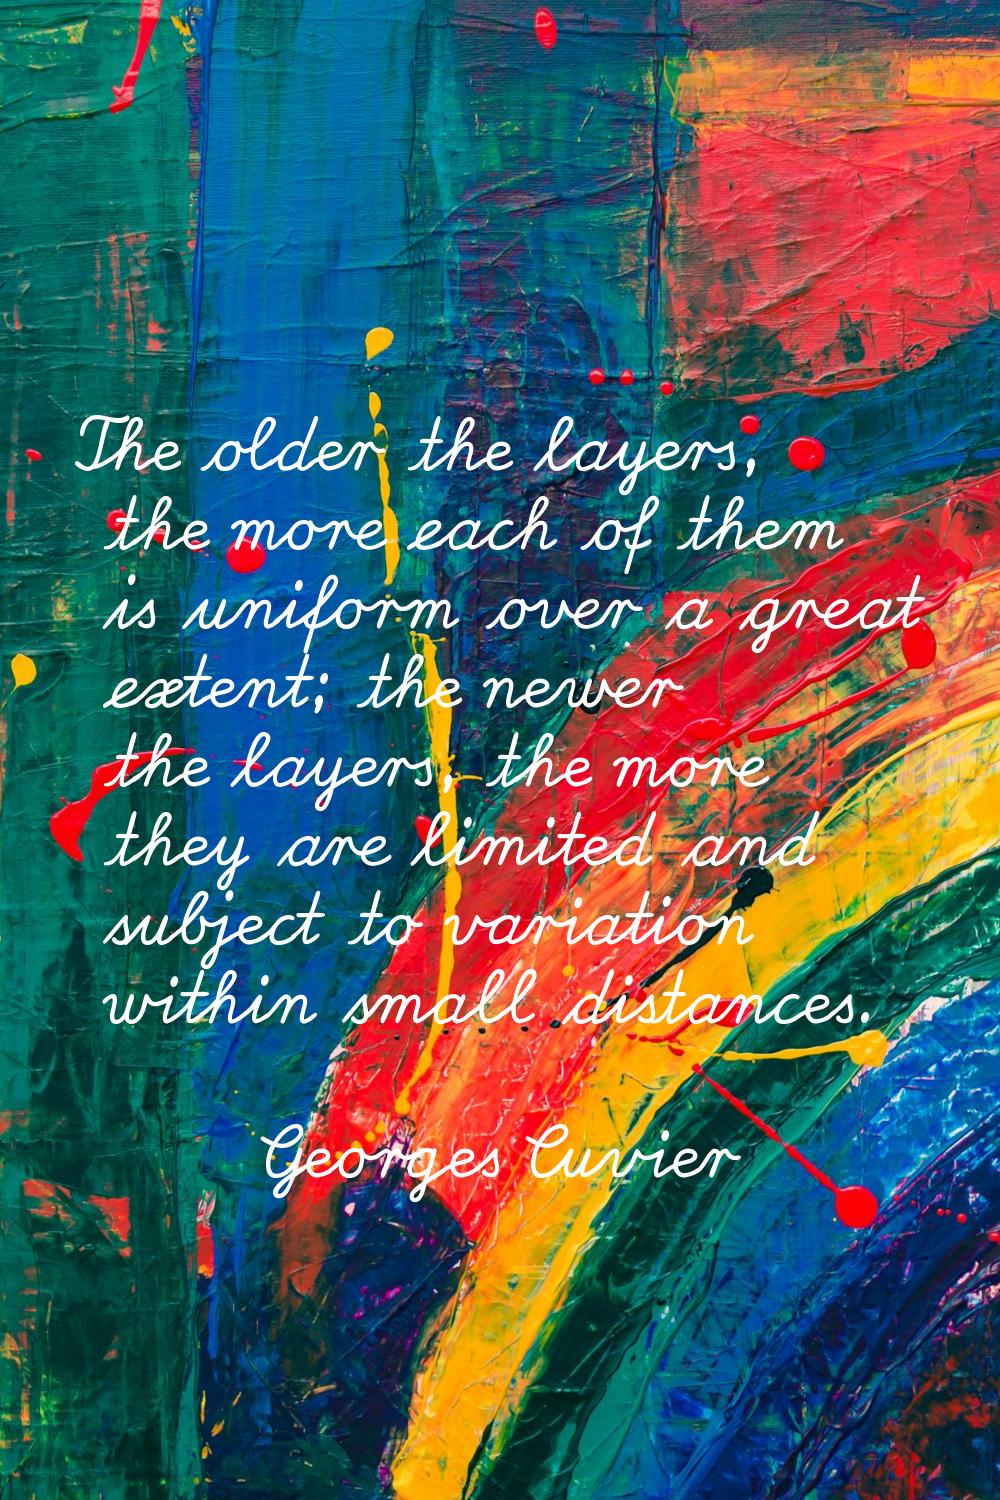 The older the layers, the more each of them is uniform over a great extent; the newer the layers, t